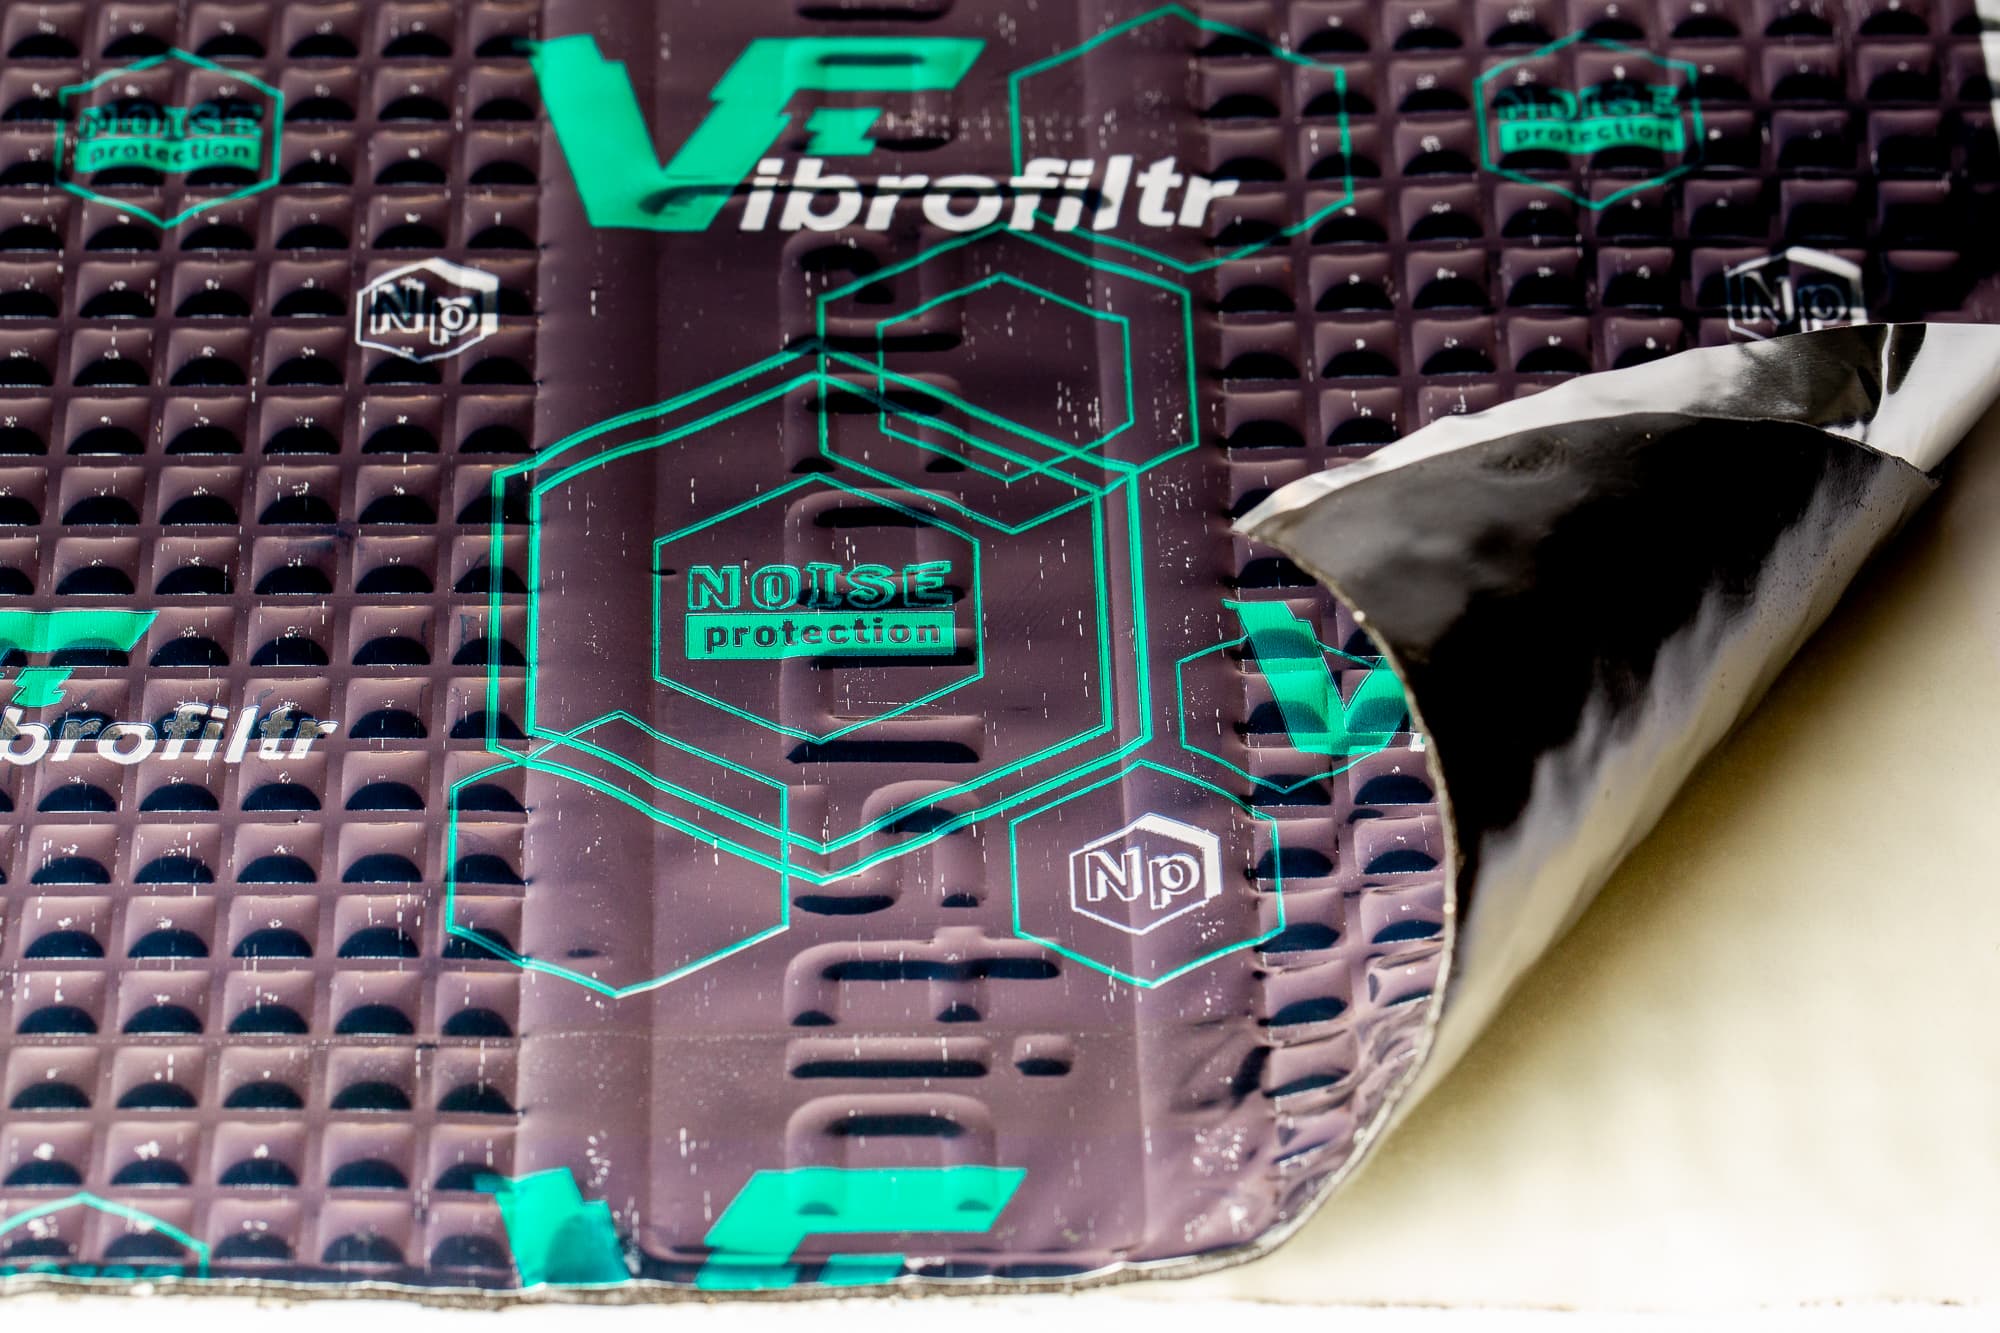 Vibrofiltr- Materials for acoustic insulation of cars